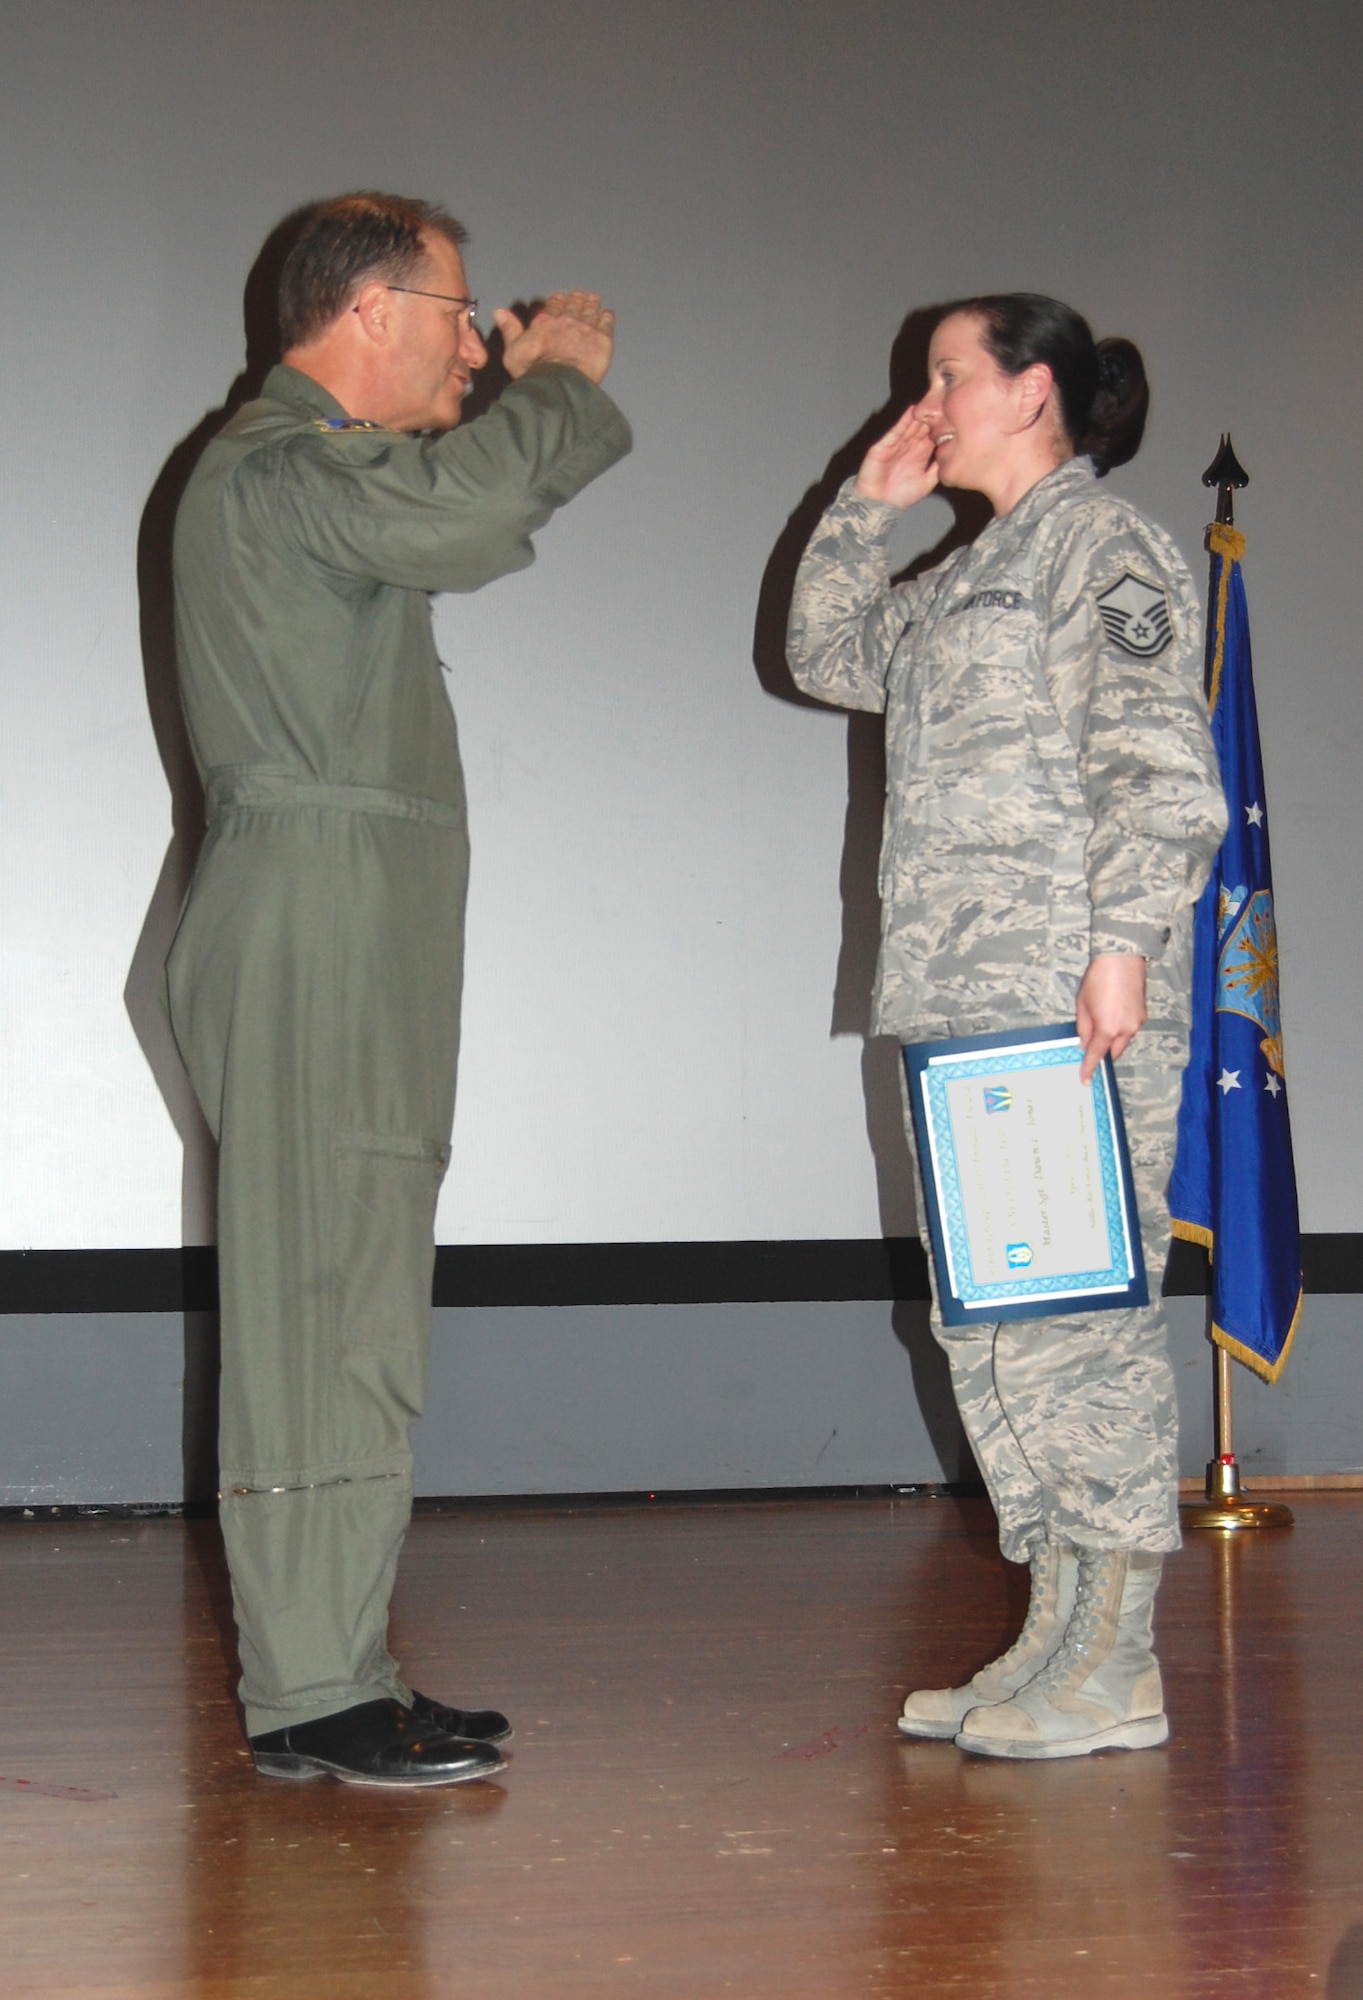 NELLIS AIR FORCE BASE, Nev. -- (Right) Master Sgt. Dawn Jones, 926th Aerospace Medicine Squadron medical technician, is recognized as the 926th Group's 2010 Senior Noncommissioned Officer of the Year by Col. Herman Brunke, 926th GP commander, during a commander's call here April 2. (U.S. Air Force photo/Capt. Jessica Martin)